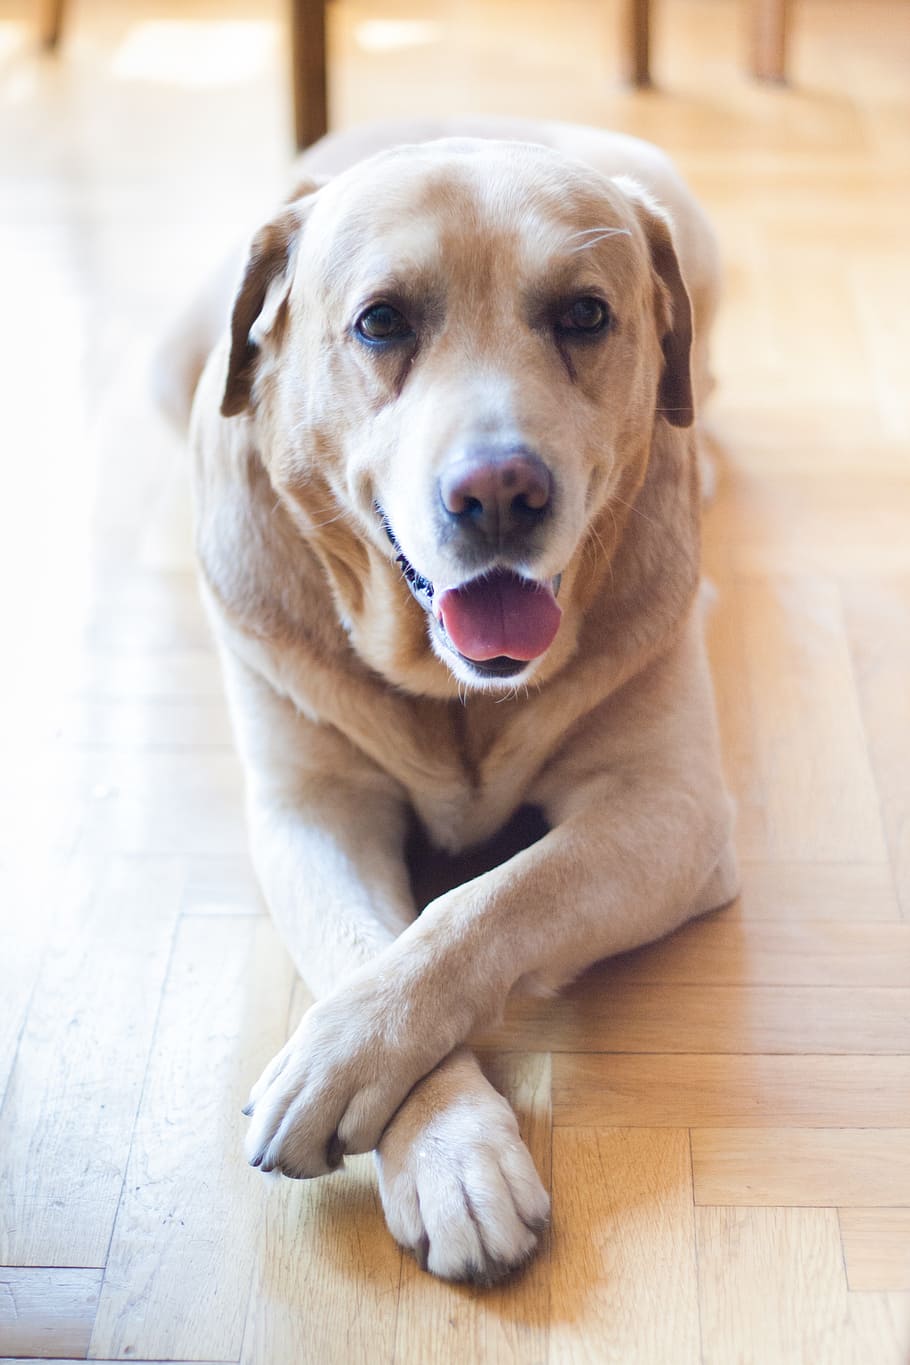 tilt shift lens photography, adult, yellow, laying, brown, wooden, flooring, dog, pet, old